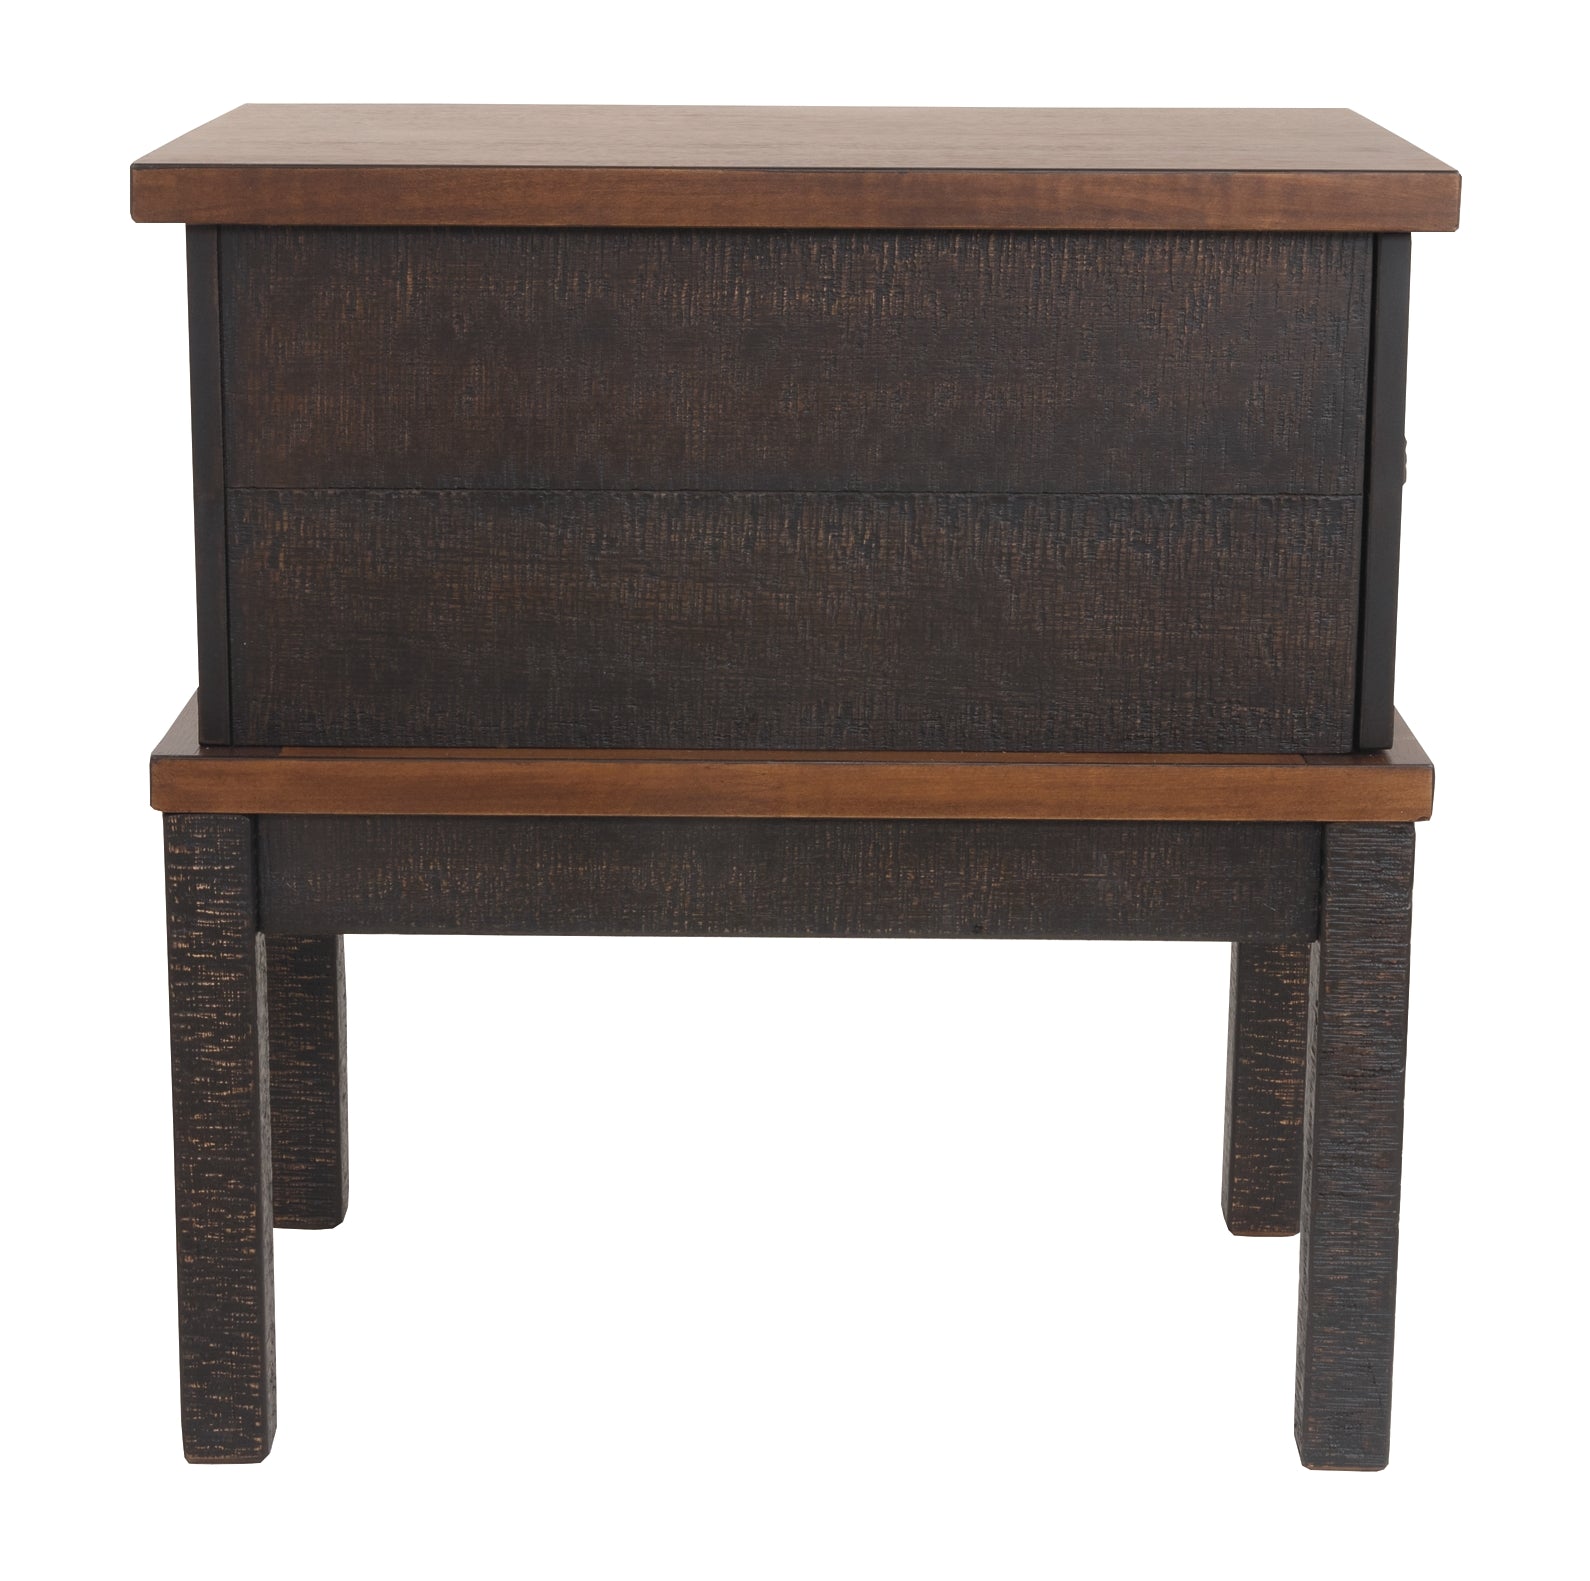 Stanah Chair Side End Table JB's Furniture  Home Furniture, Home Decor, Furniture Store